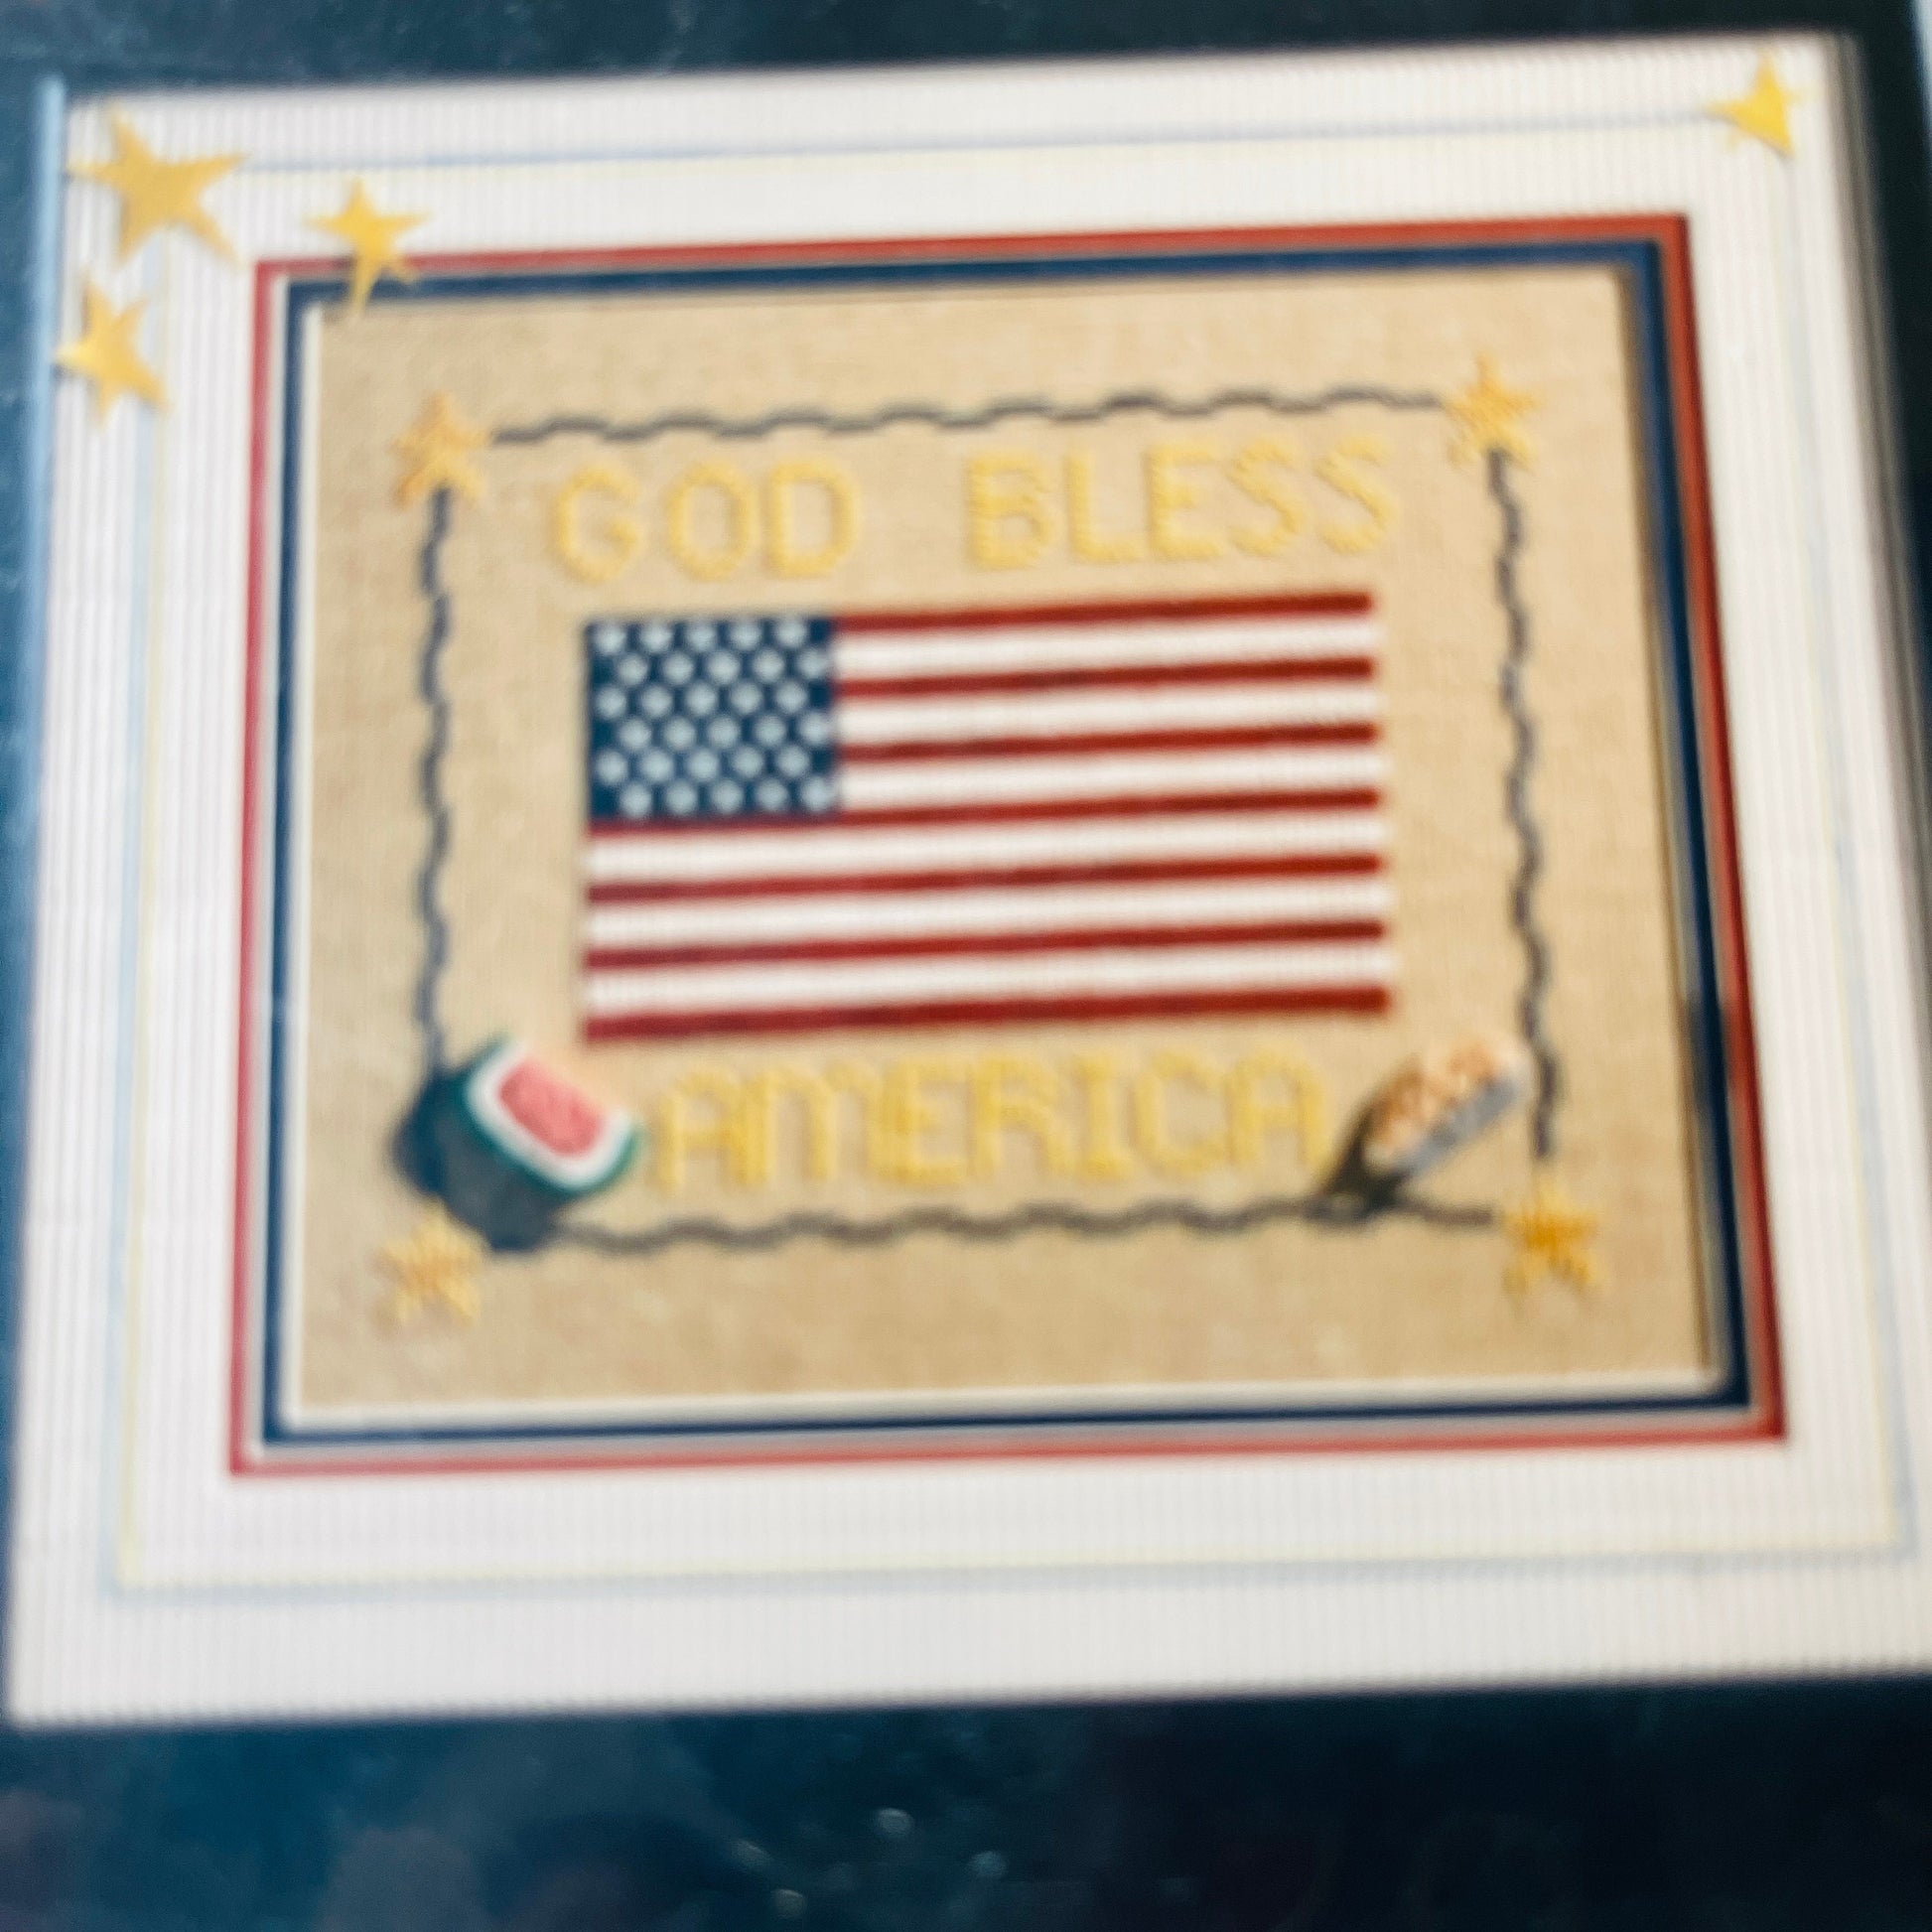 Holly House Designs, God Bless America, Counted Cross Stitch Design Chart, 103 by 84